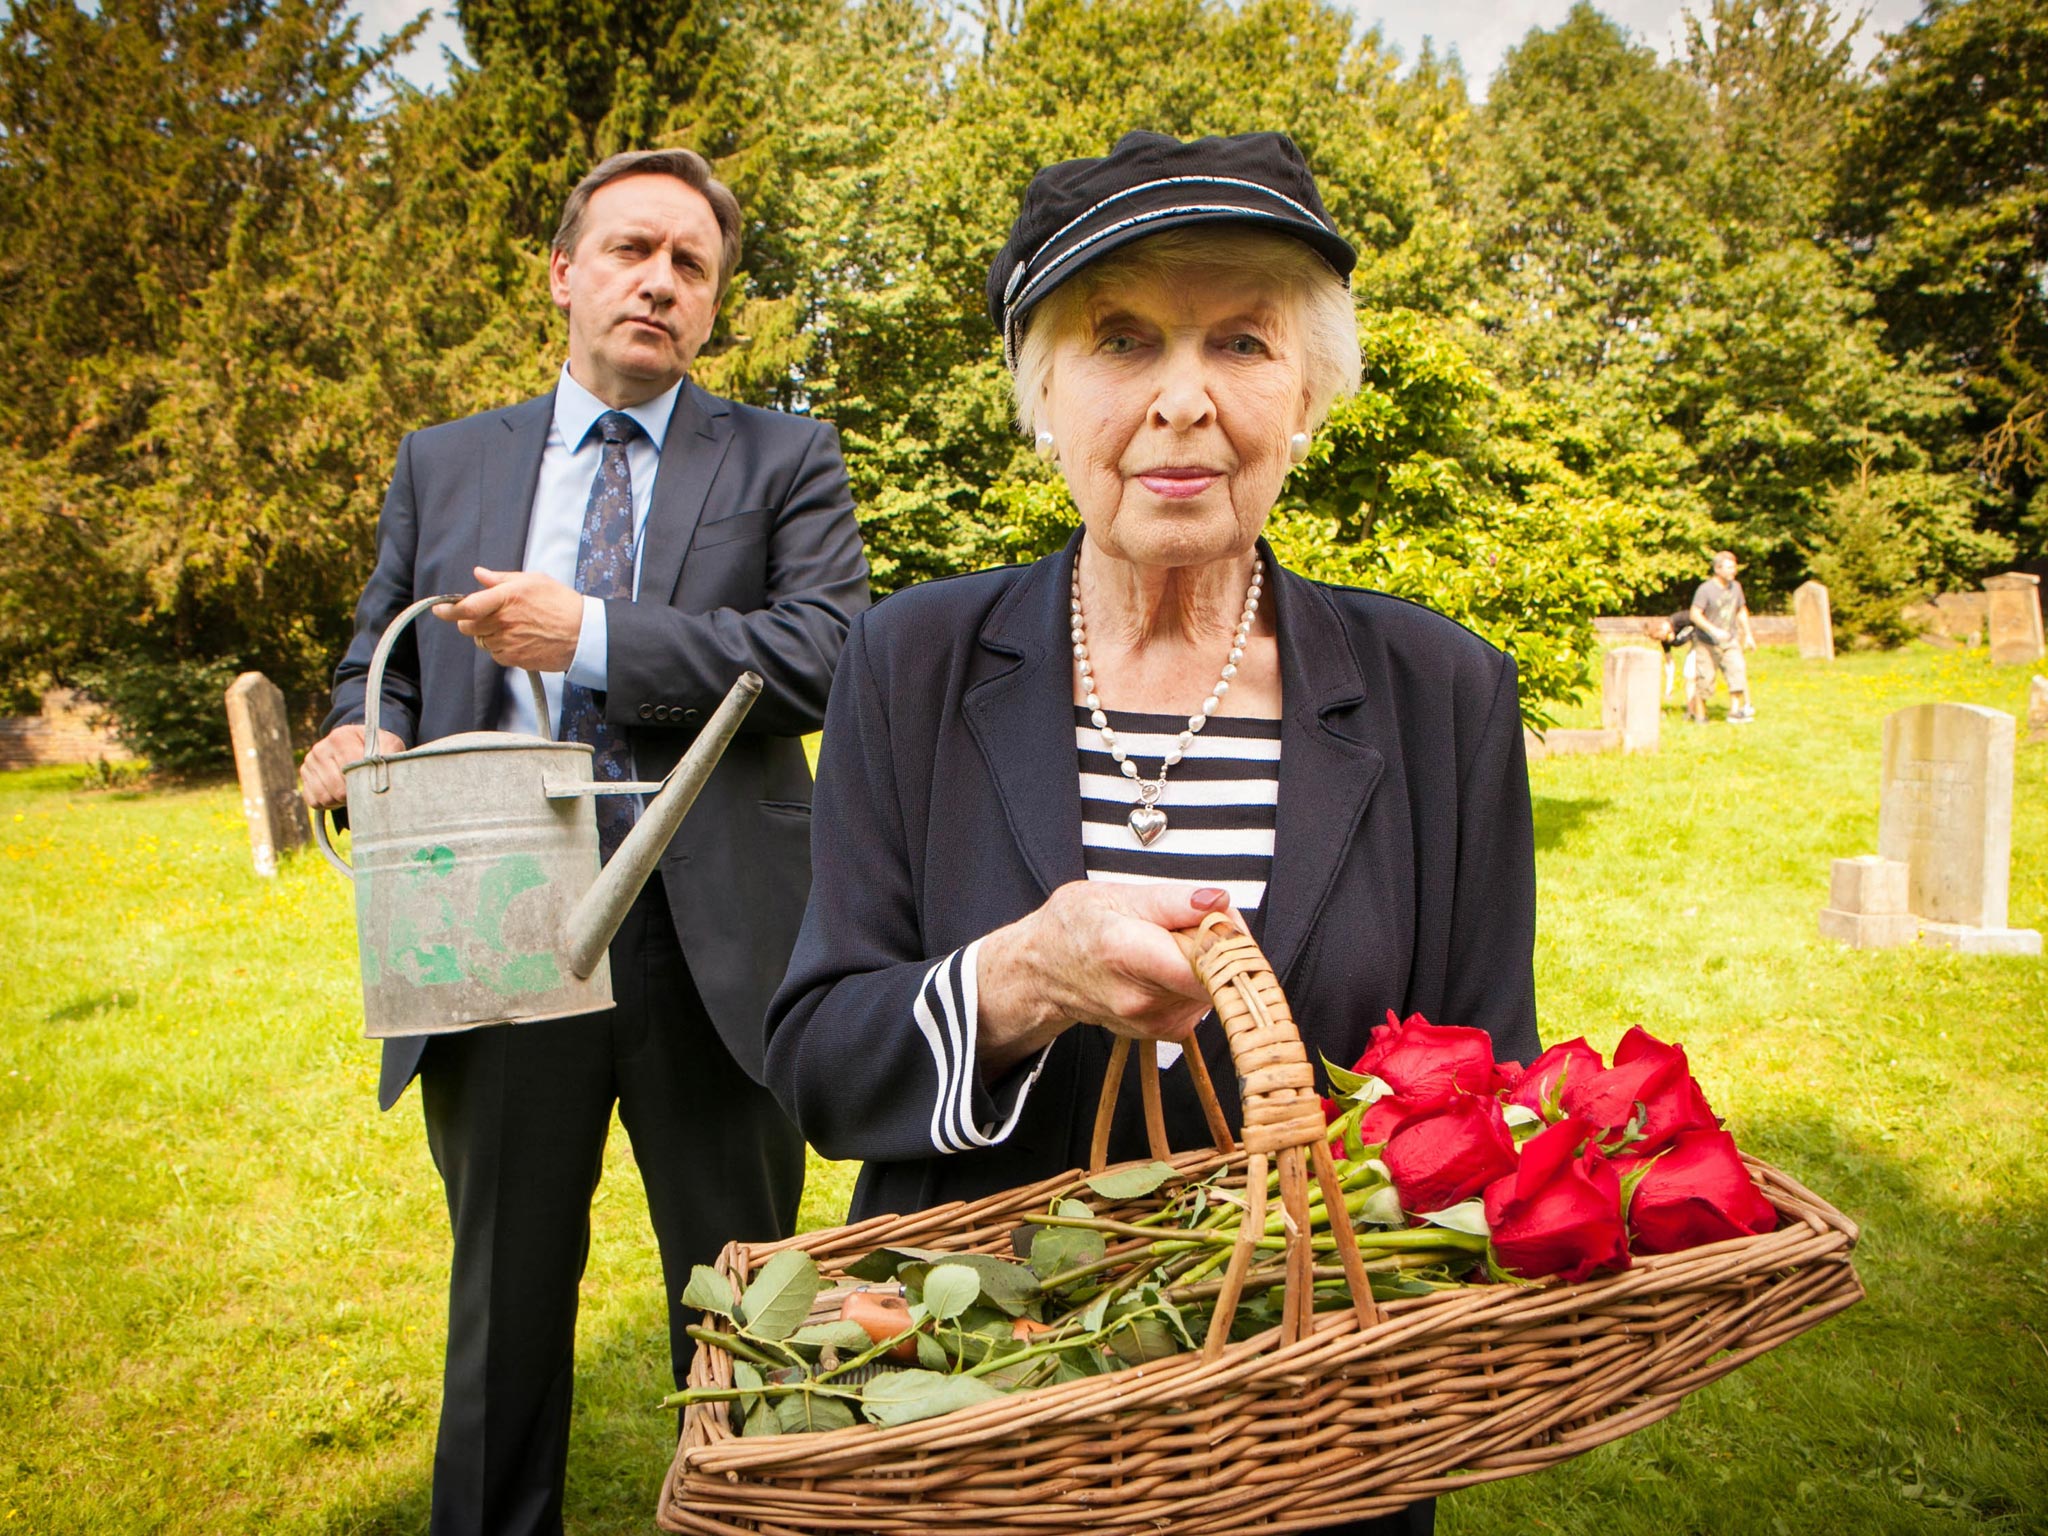 June Whitfield as Molly Darnley and Neil Dudgeon as DCI John Barnaby in ‘Midsomer Murders’